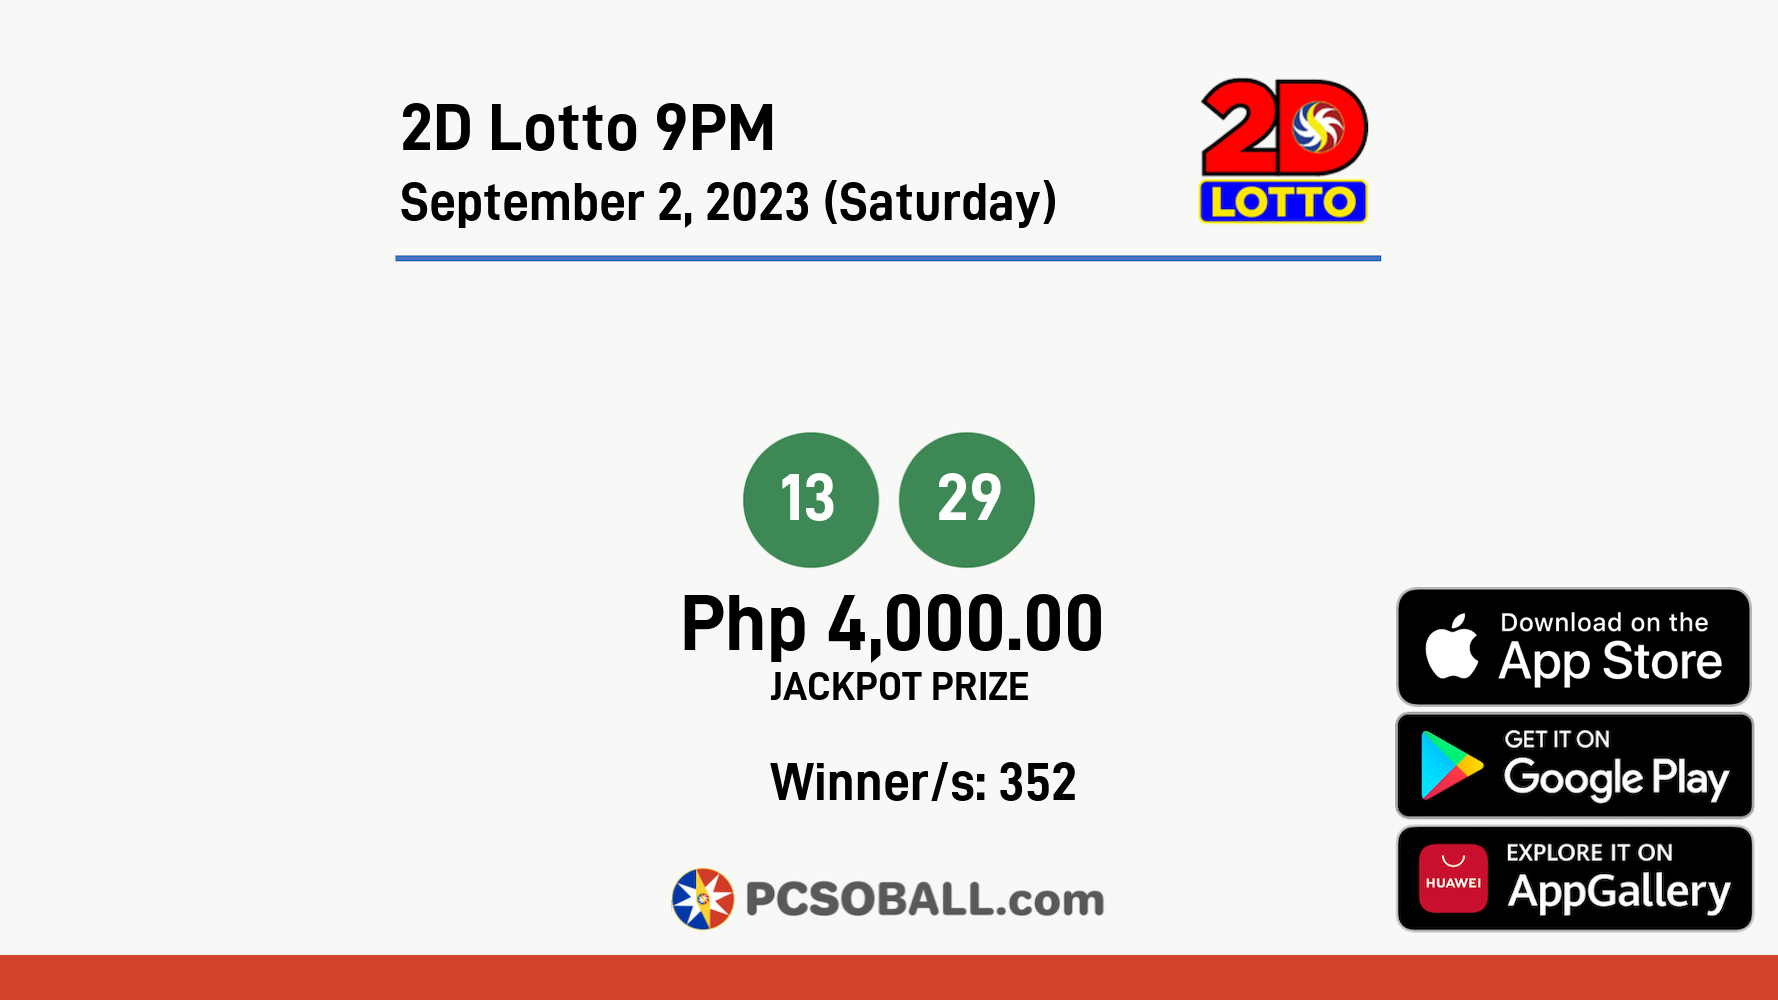 2D Lotto 9PM September 2, 2023 (Saturday) Result